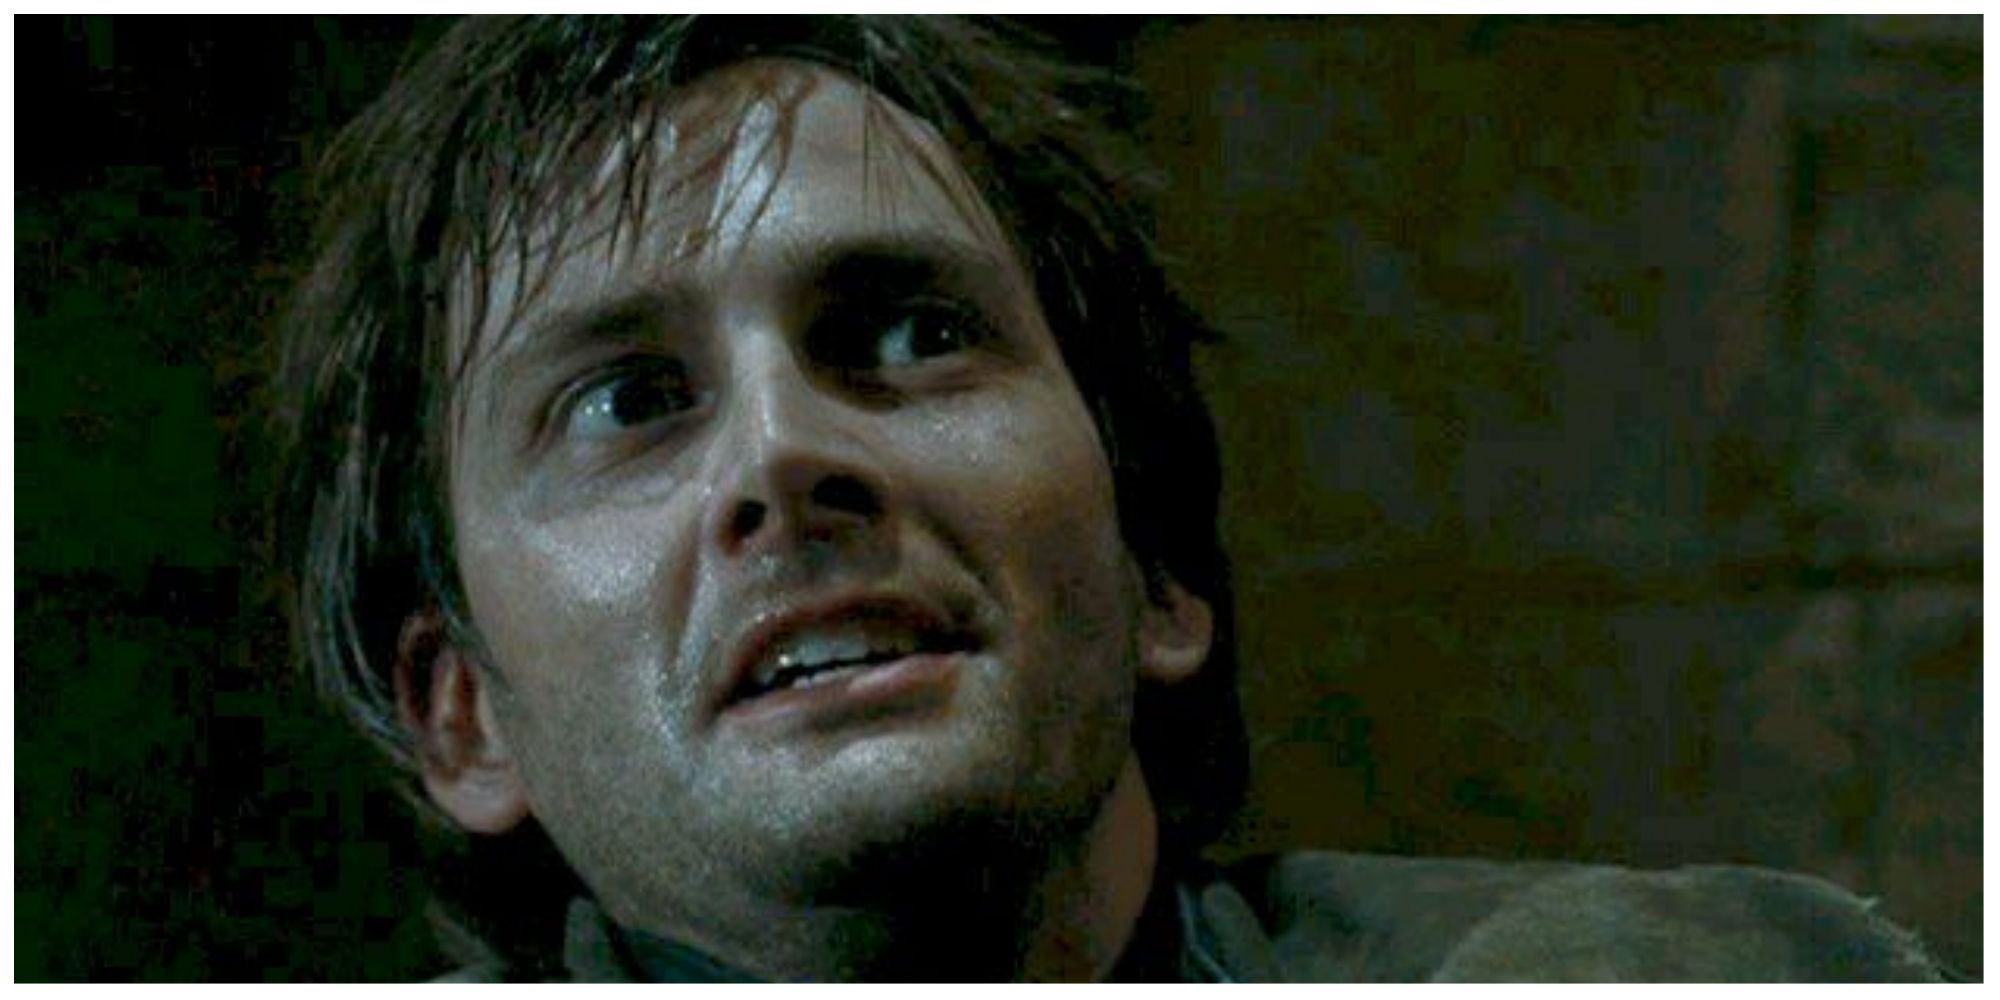 David Tennnant as Barty Crouch Jr. In Harry Potter and the Goblet Of Fire